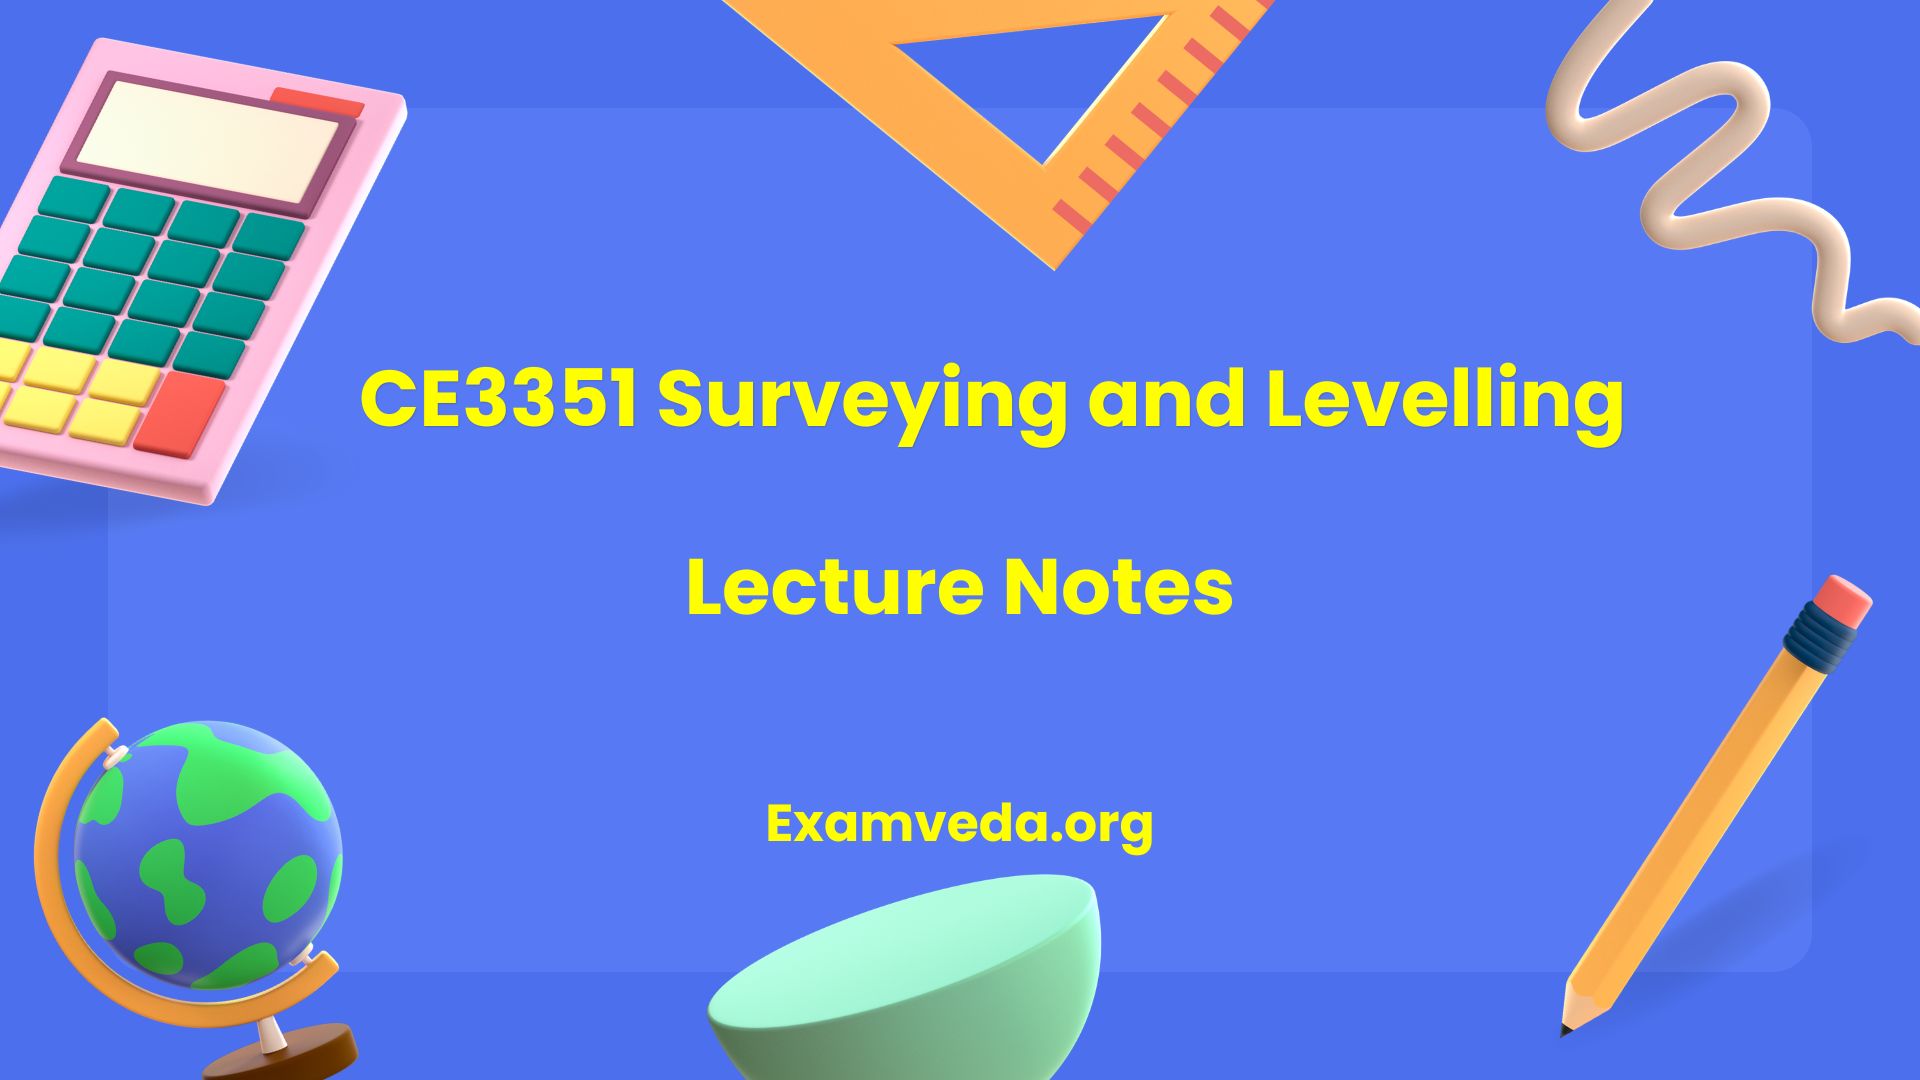 CE3351 Surveying and Levelling Lecture Notes